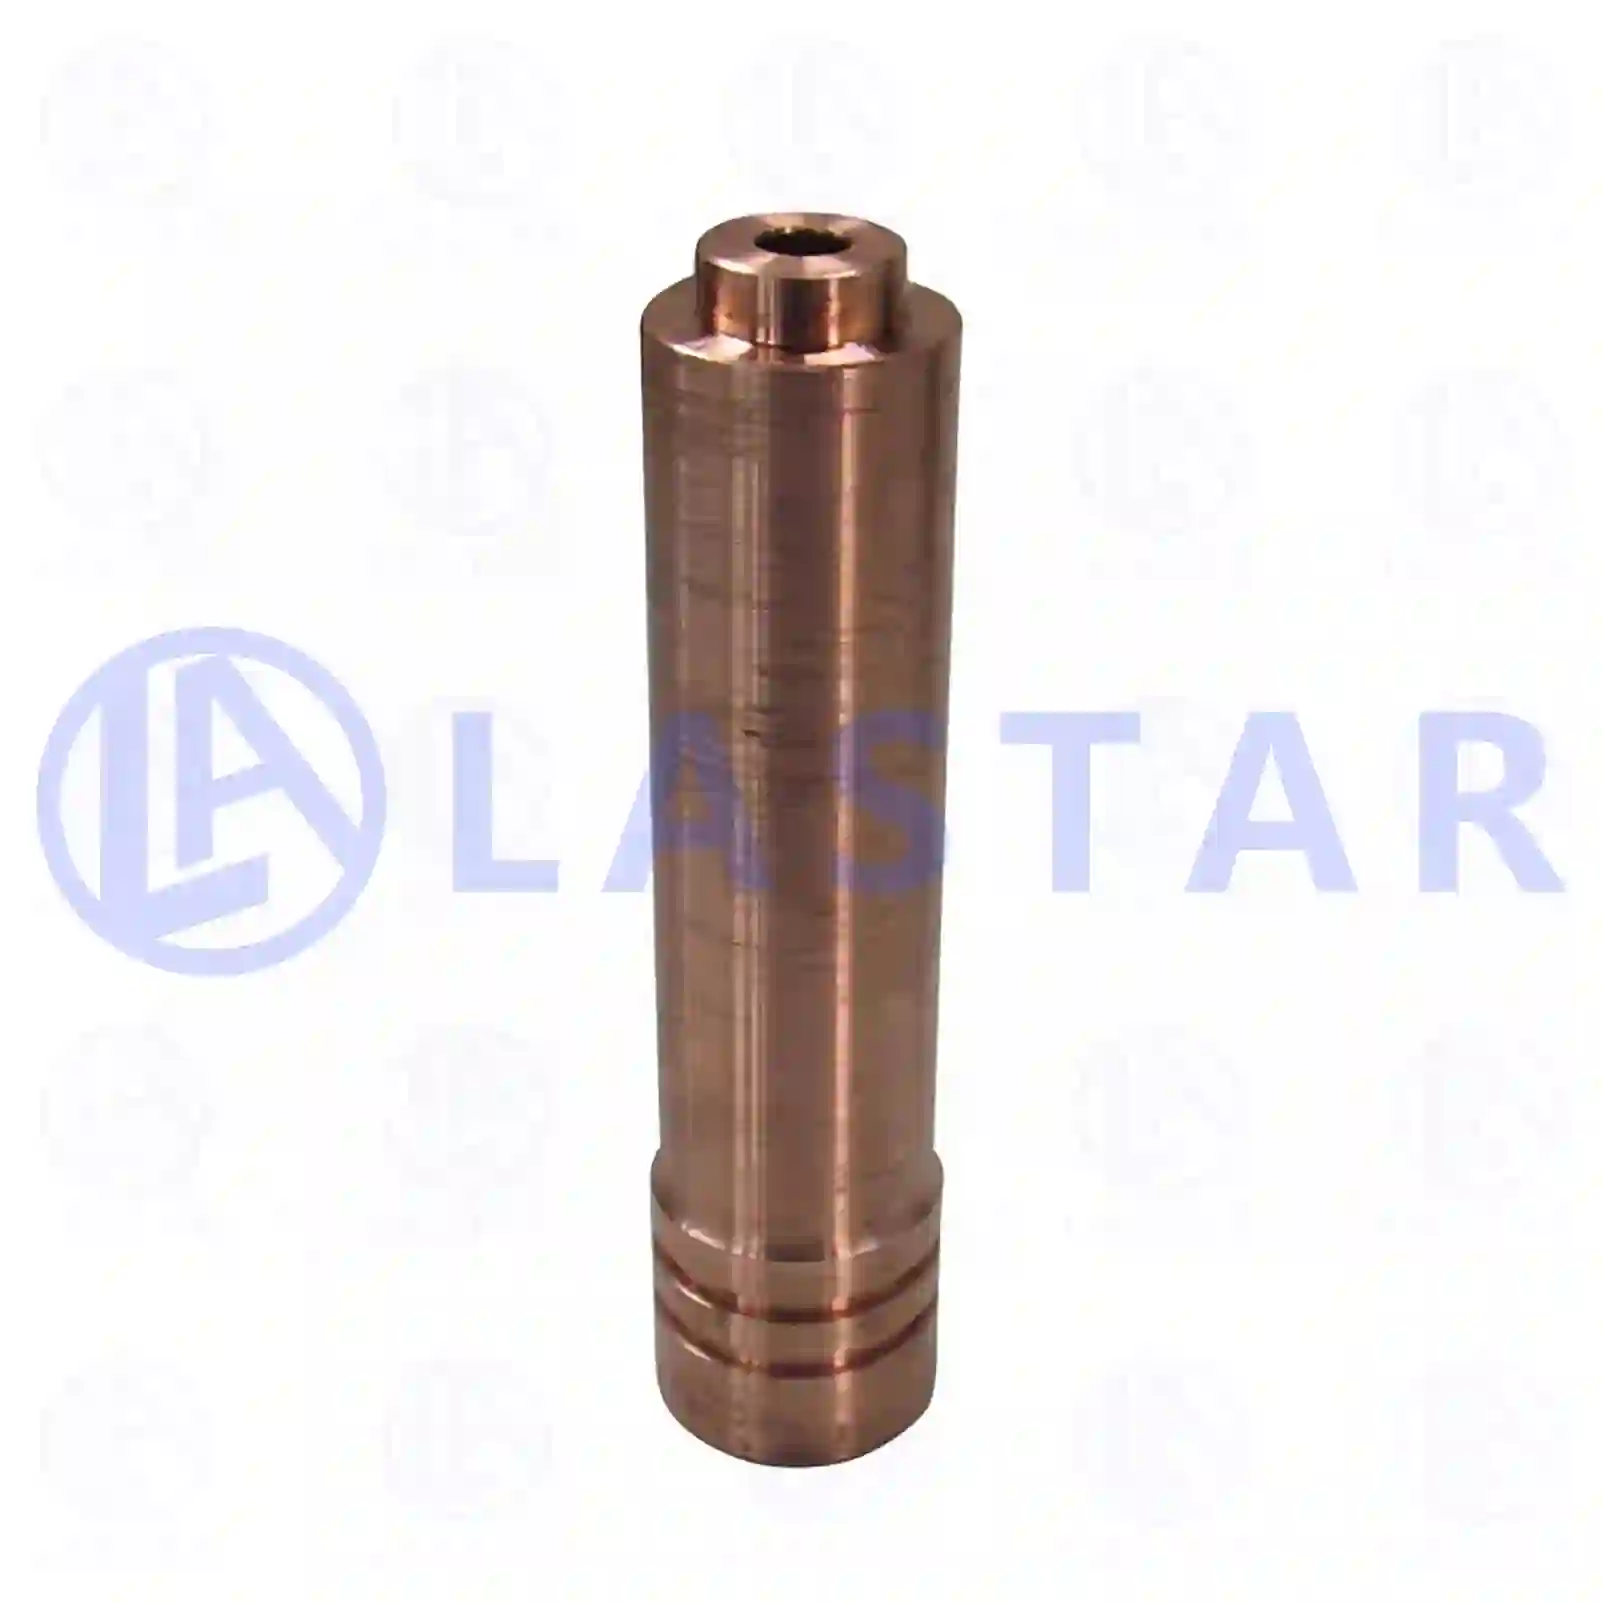  Injection sleeve || Lastar Spare Part | Truck Spare Parts, Auotomotive Spare Parts